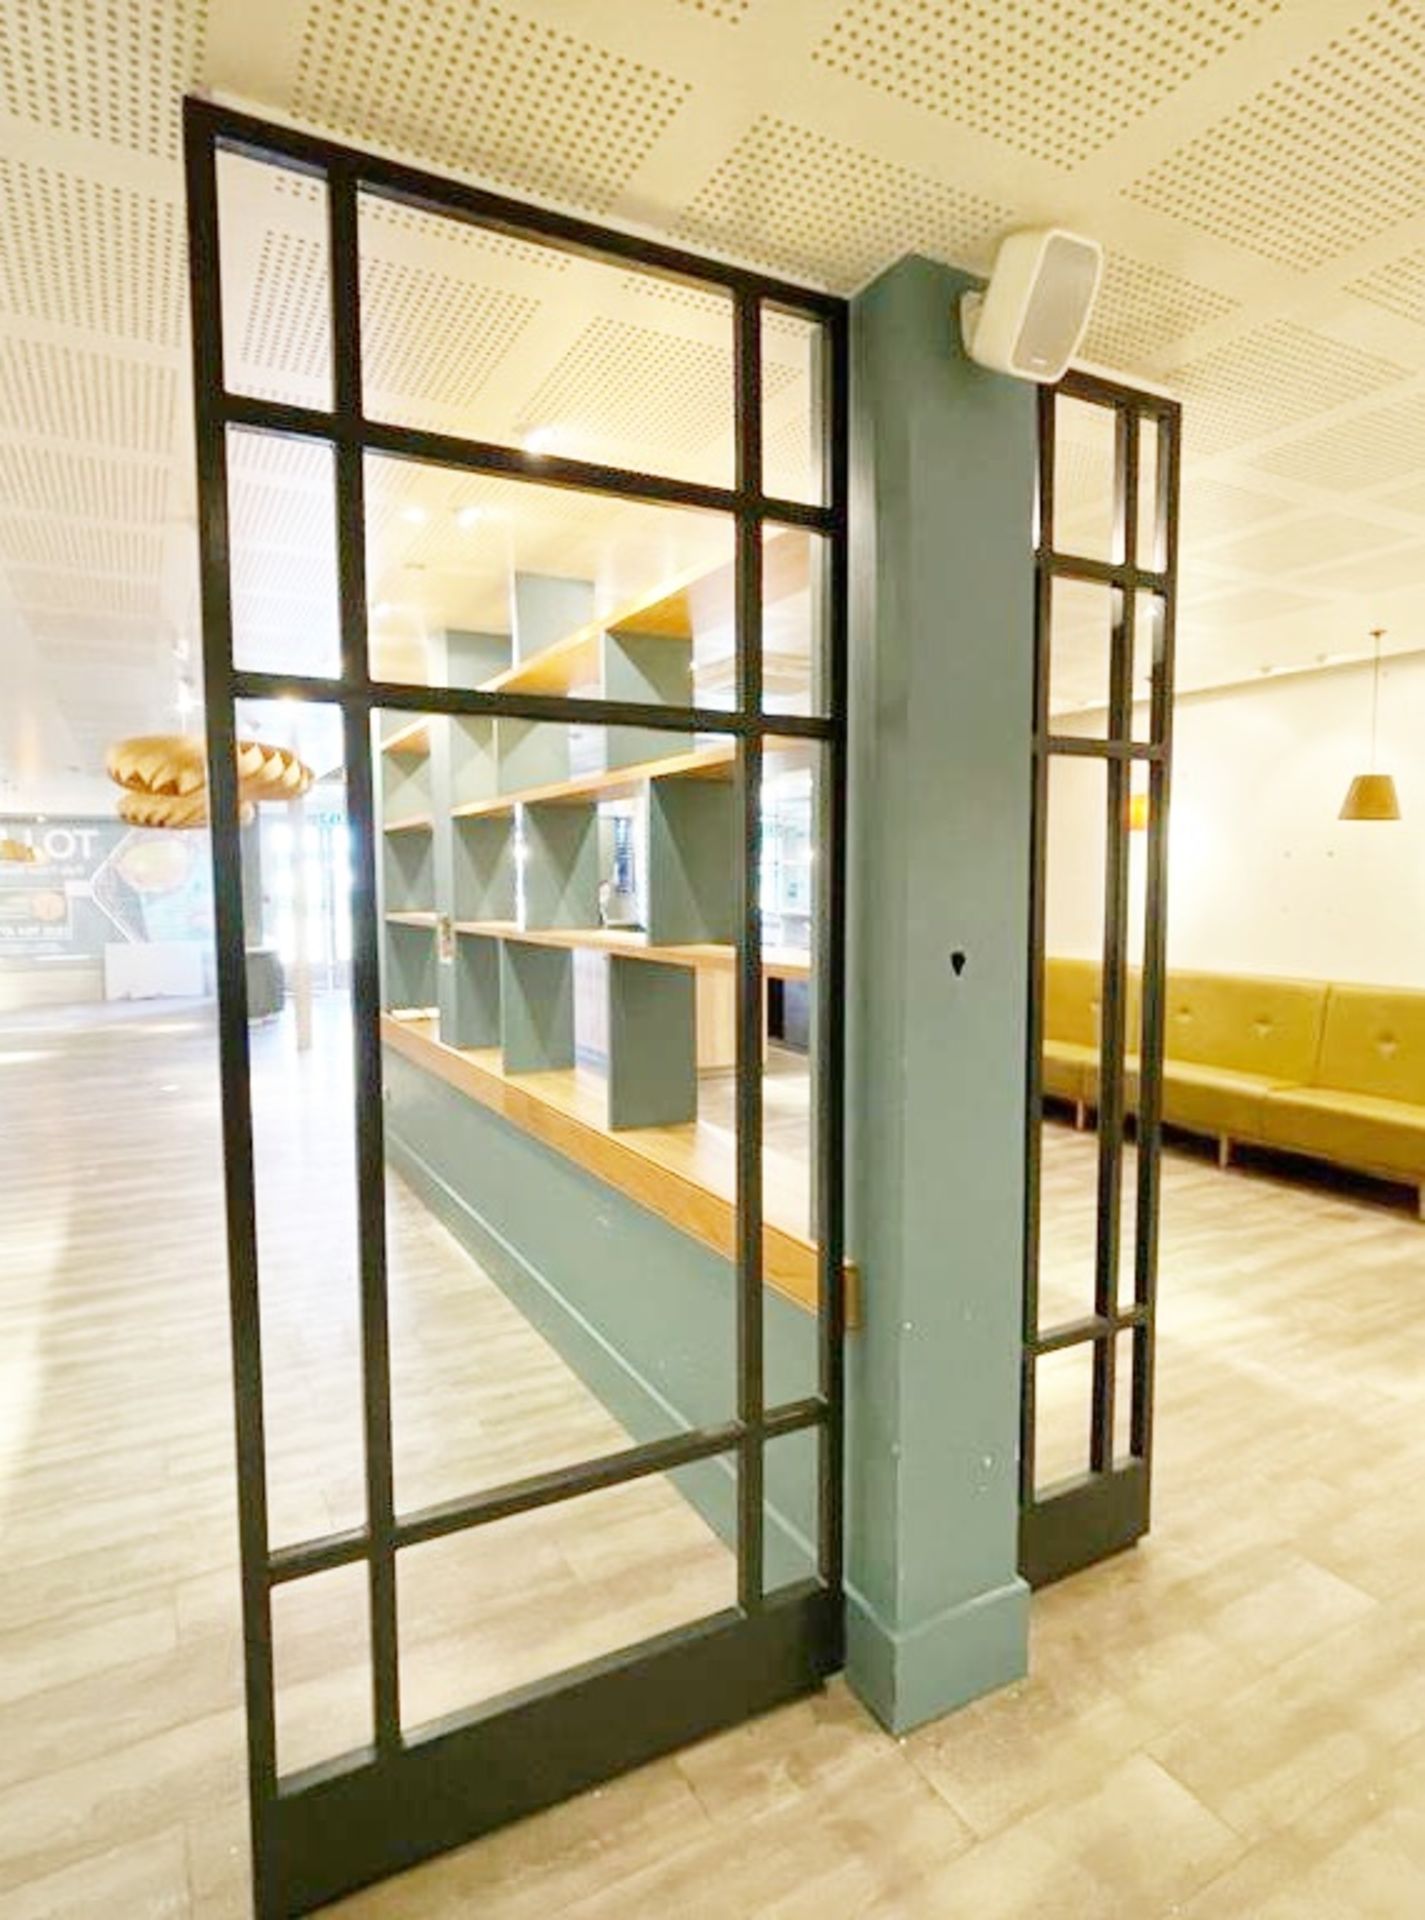 4 x Bespoke Upright Metal Partition Dividers - 4cm Thick Metal - Dimensions: H270 x W58/58/50/112